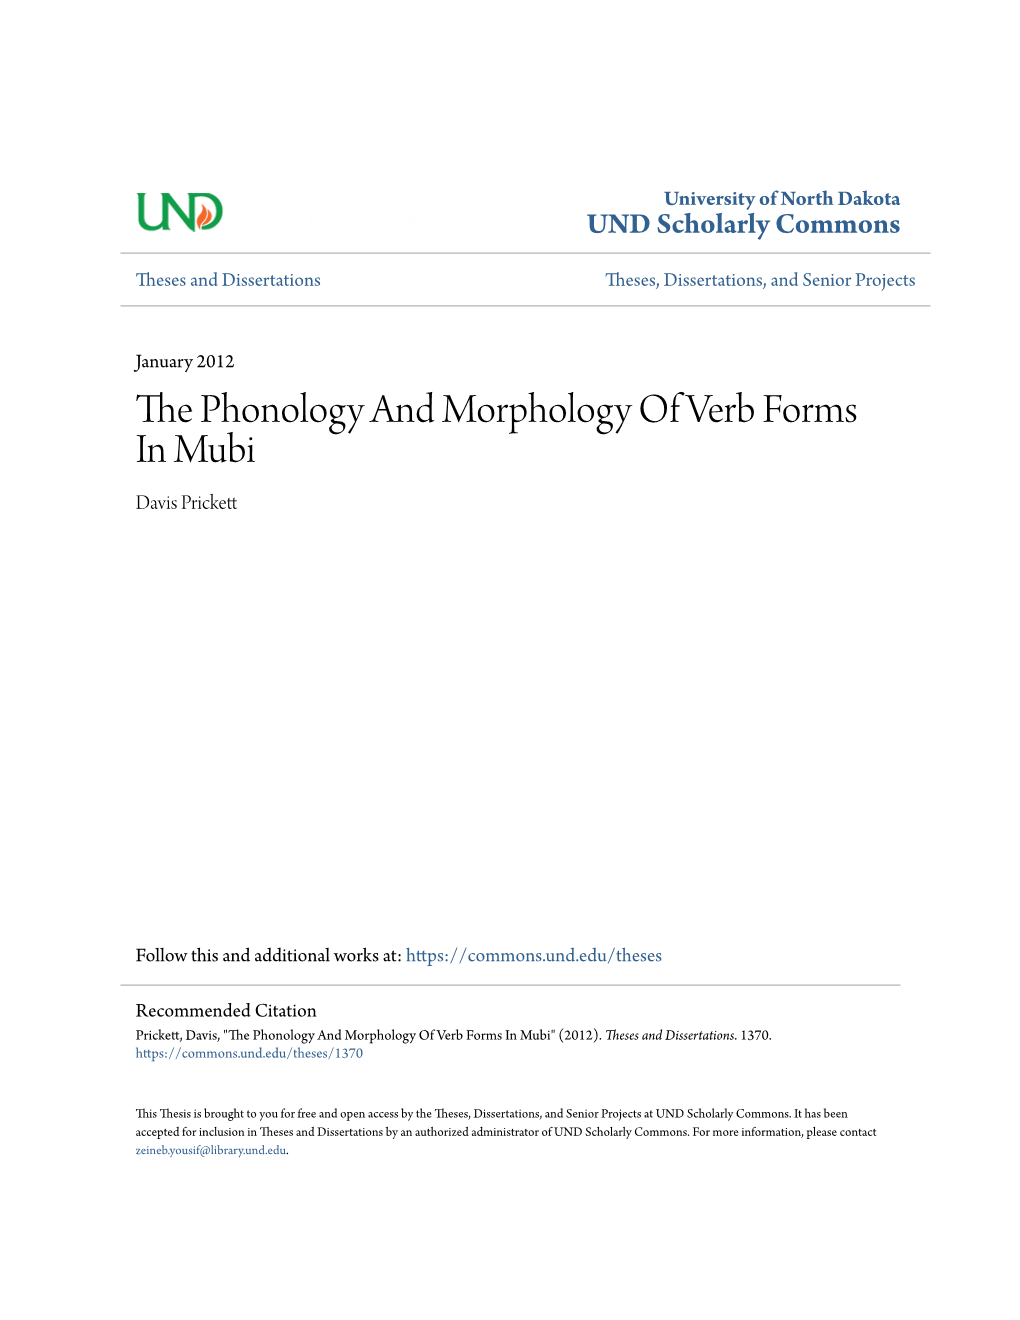 The Phonology and Morphology of Verb Forms in Mubi